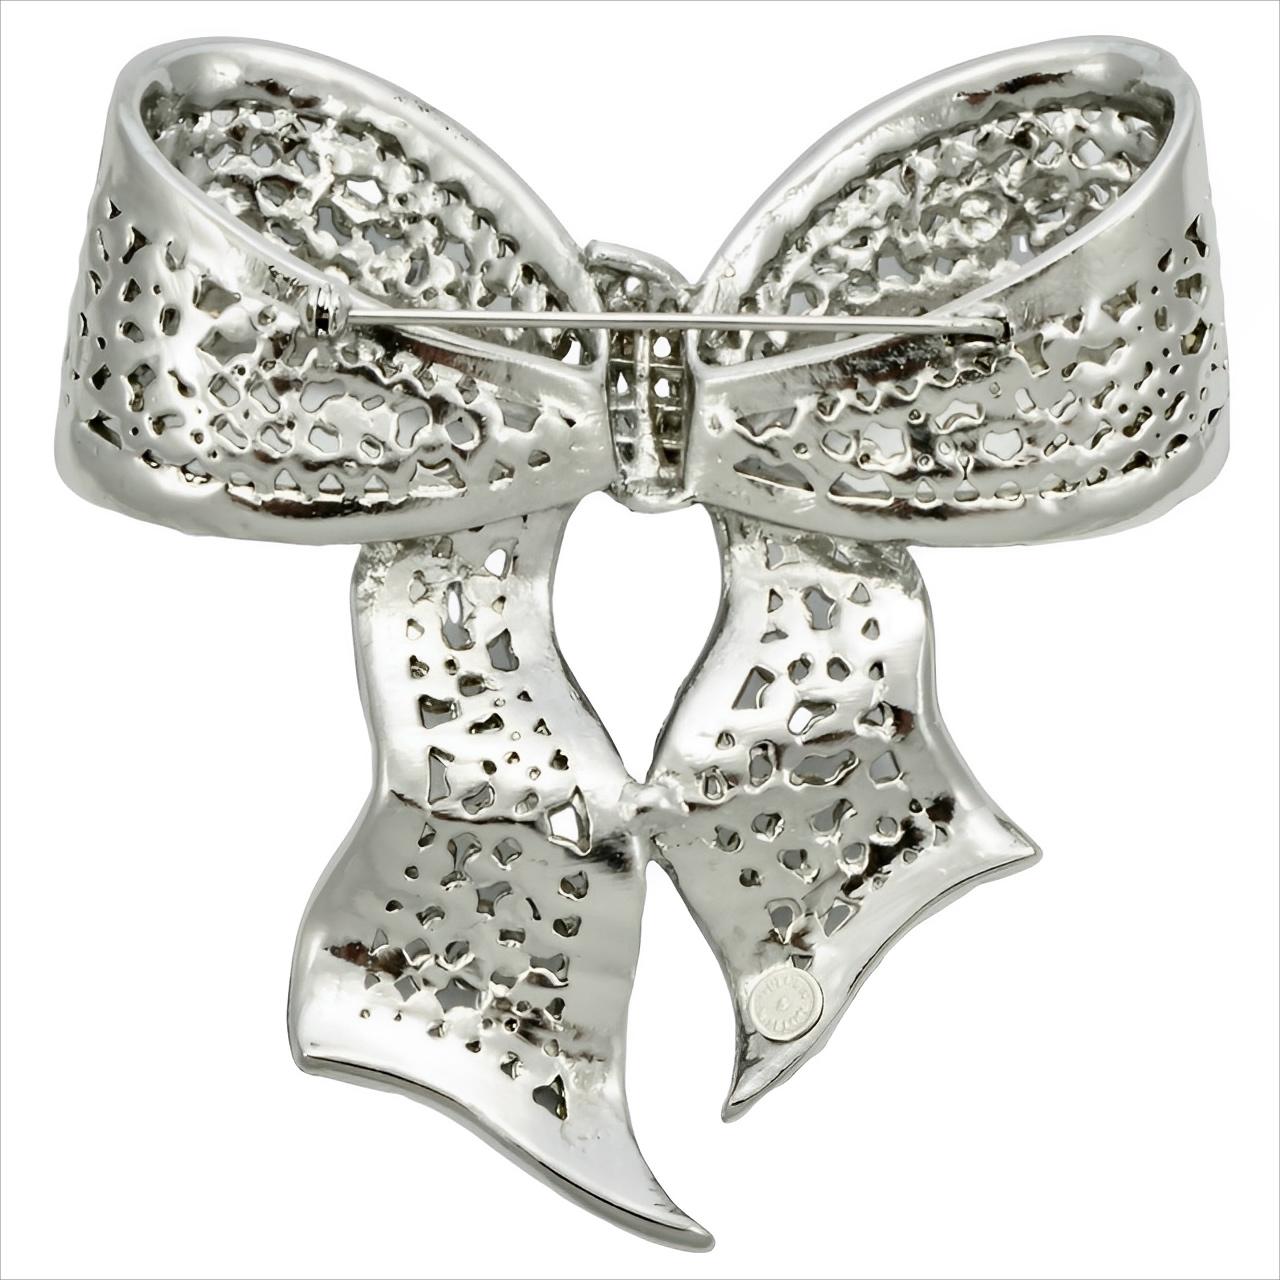 Fabulous Butler & Wilson silver plated bow brooch featuring clear crystals with a pastel aurora borealis crystal edging. Measuring maximum width 8.5 cm / 3.34 inches by maximum length 9.4 cm / 3.7 inches. The brooch is in very good condition.

This